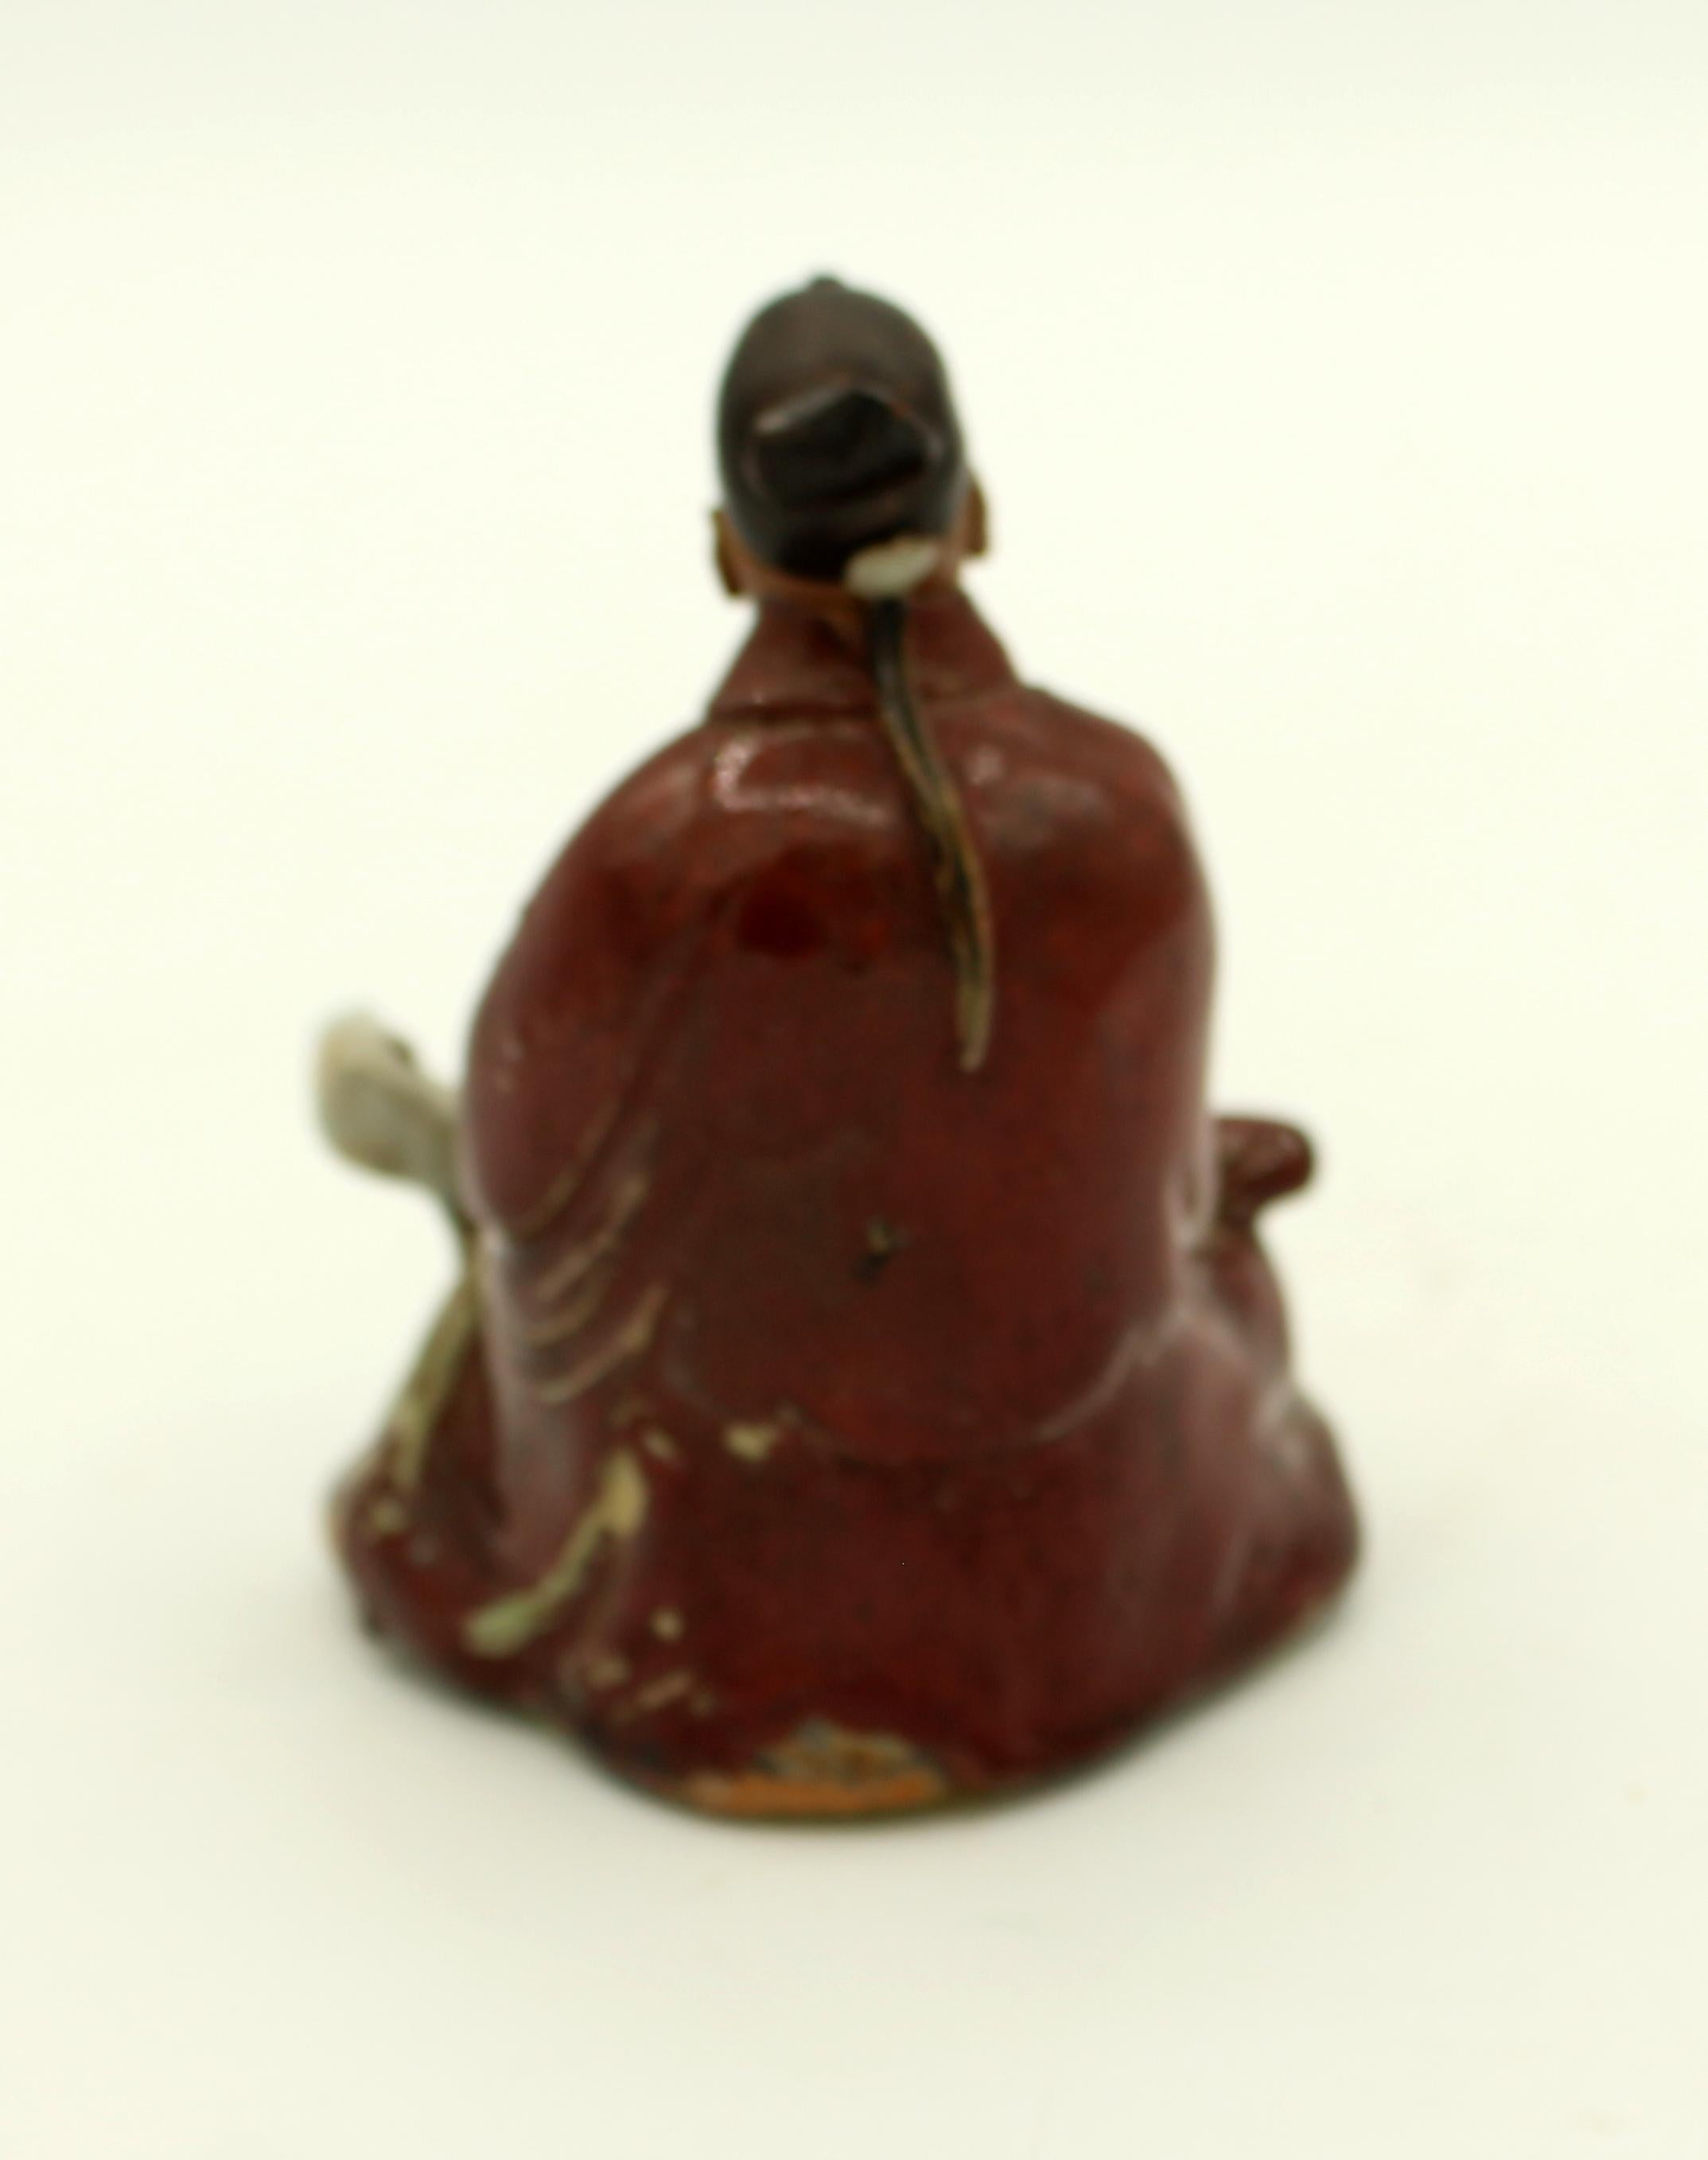 Chinese Export Circa 1920s-1930s Shiwan Pottery Seated Figure